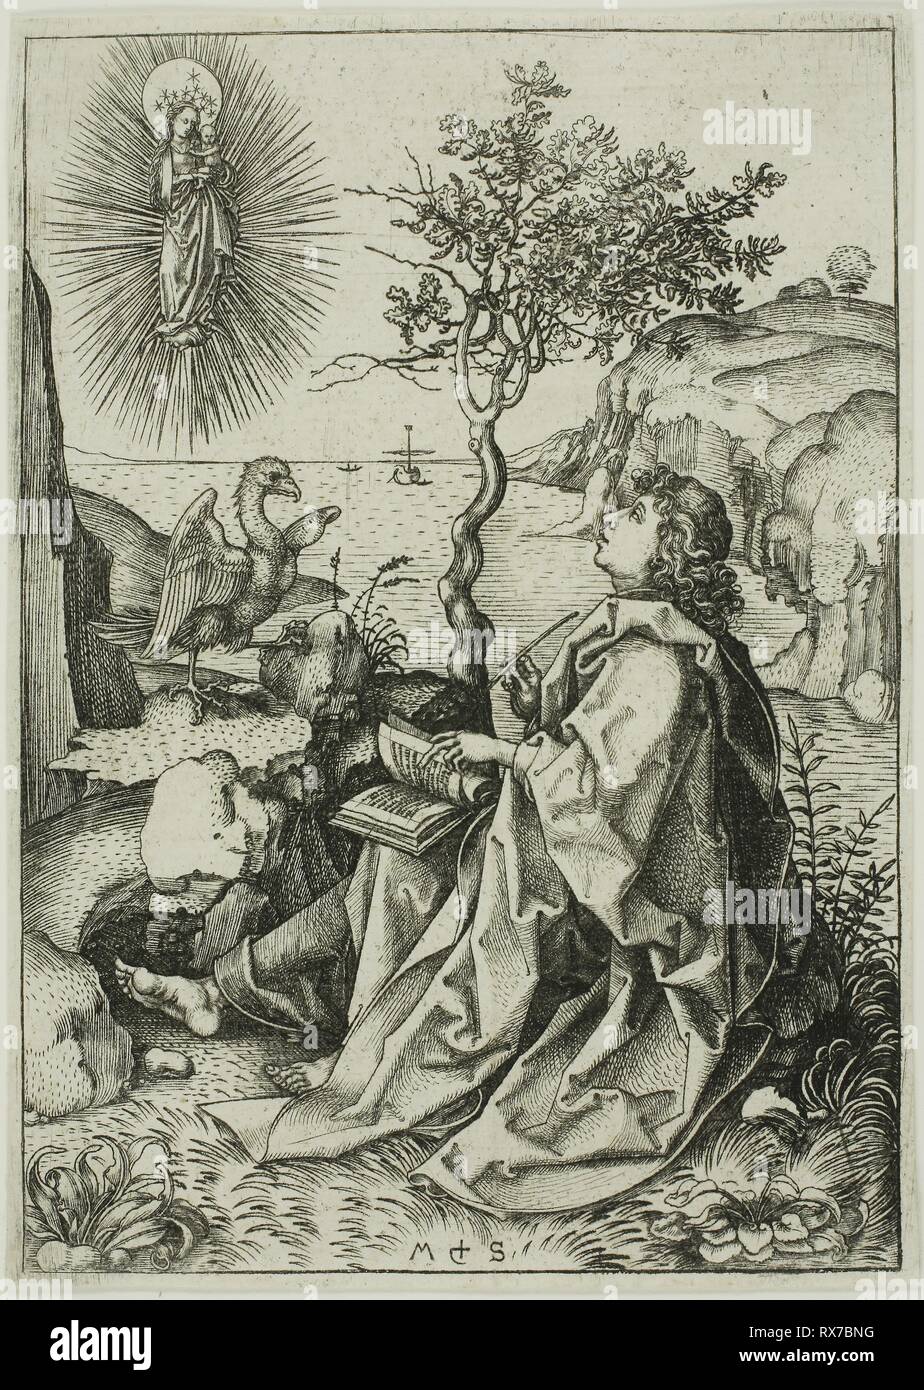 St. John the Evangelist on Patmos. Martin Schongauer; German, c. 1450-1491. Date: 1475-1485. Dimensions: 160 x 113 mm (image); 163 x 117 mm (sheet). Engraving on paper. Origin: Germany. Museum: The Chicago Art Institute. Stock Photo